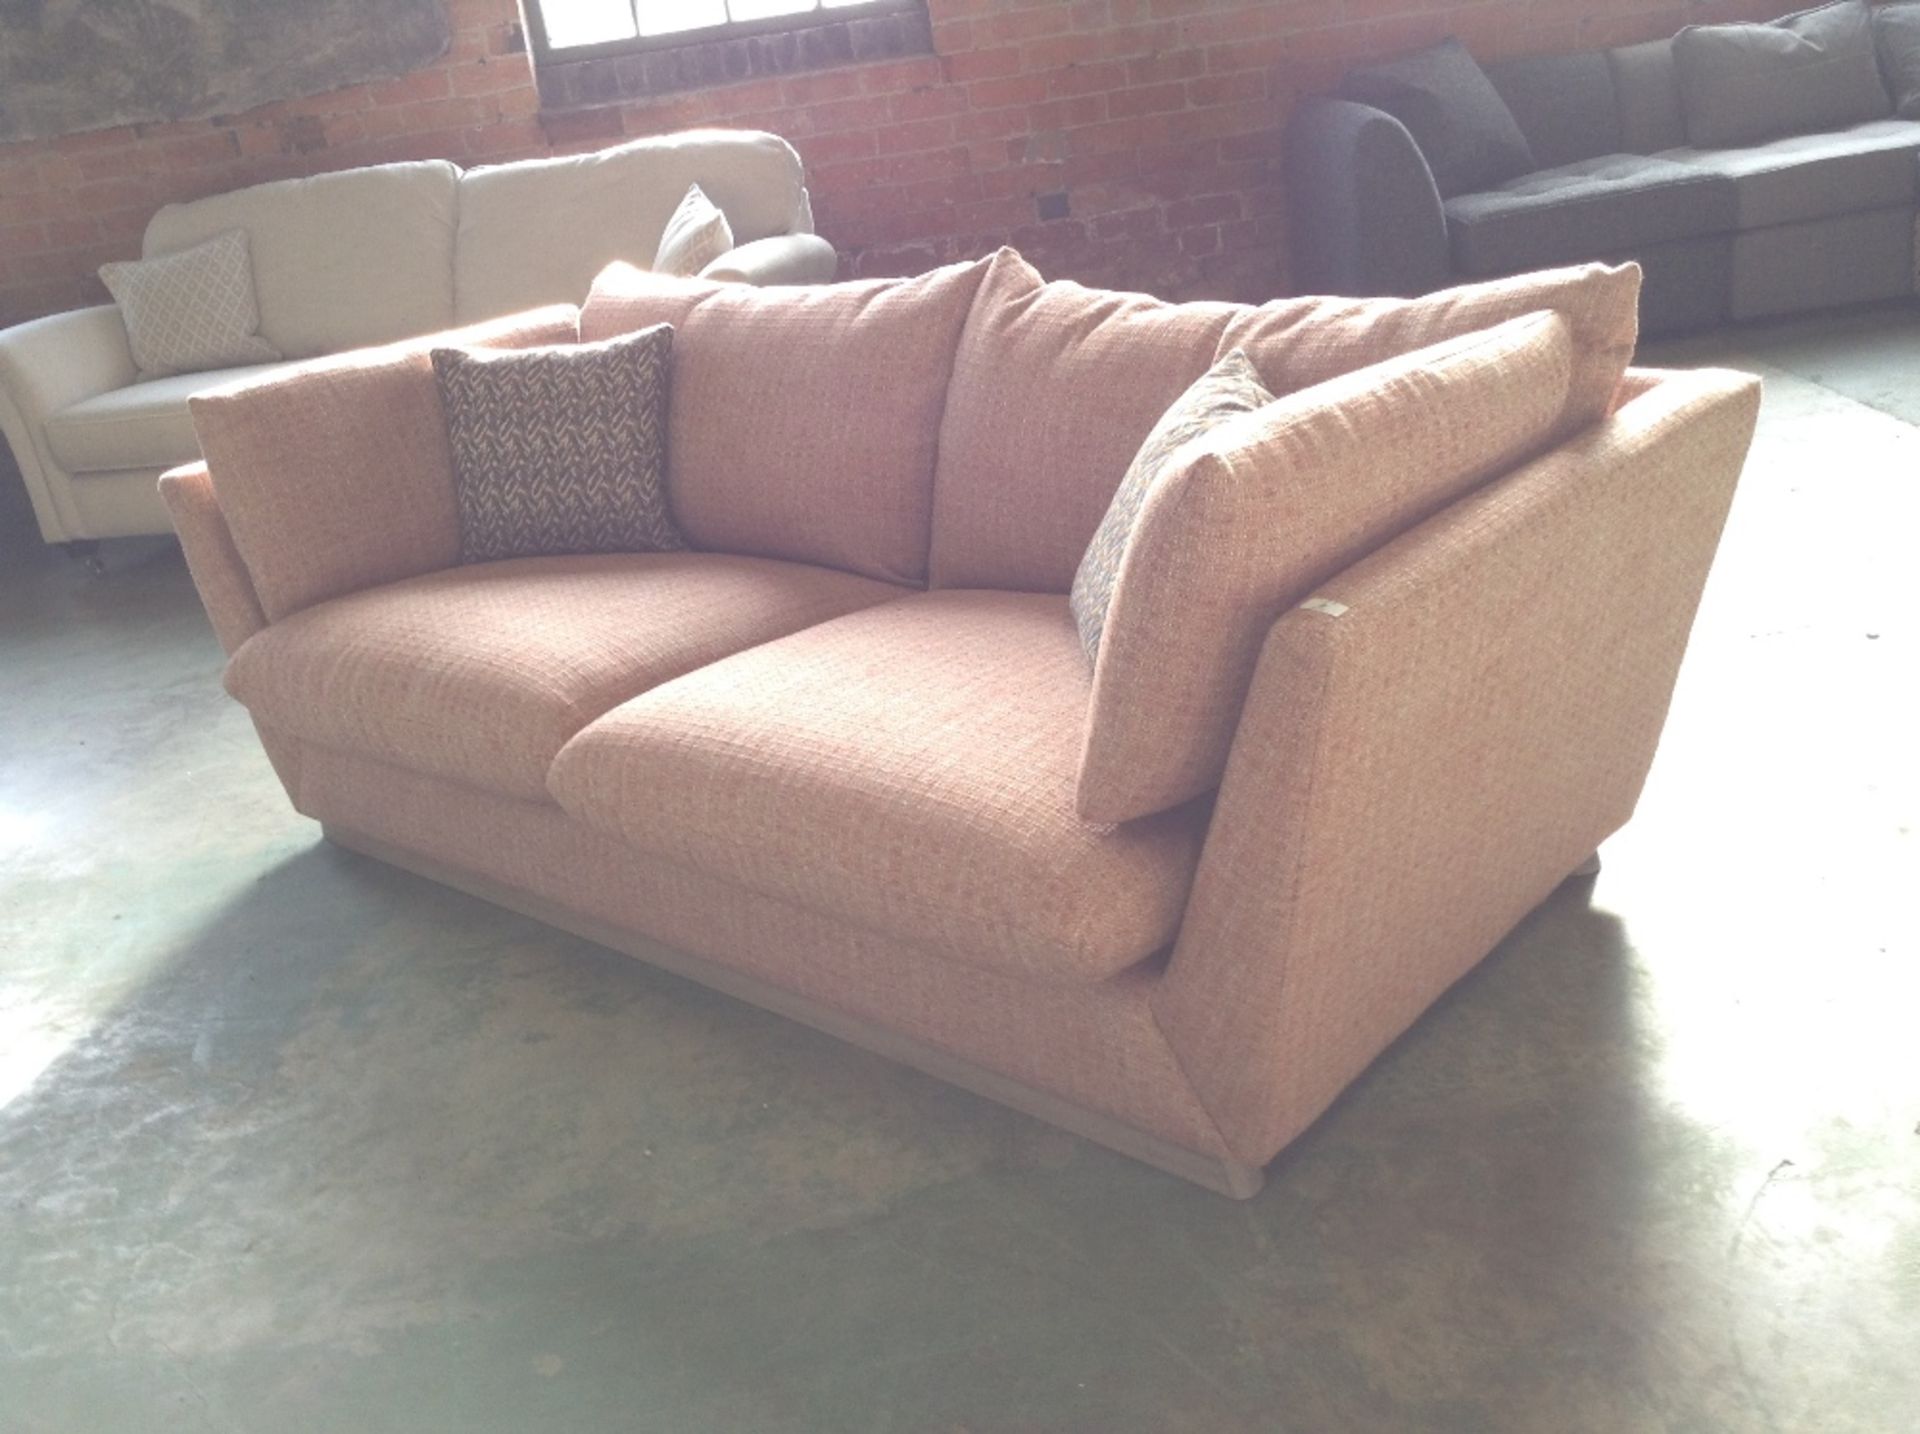 PINK 3 SEATER SOFA - Image 2 of 2